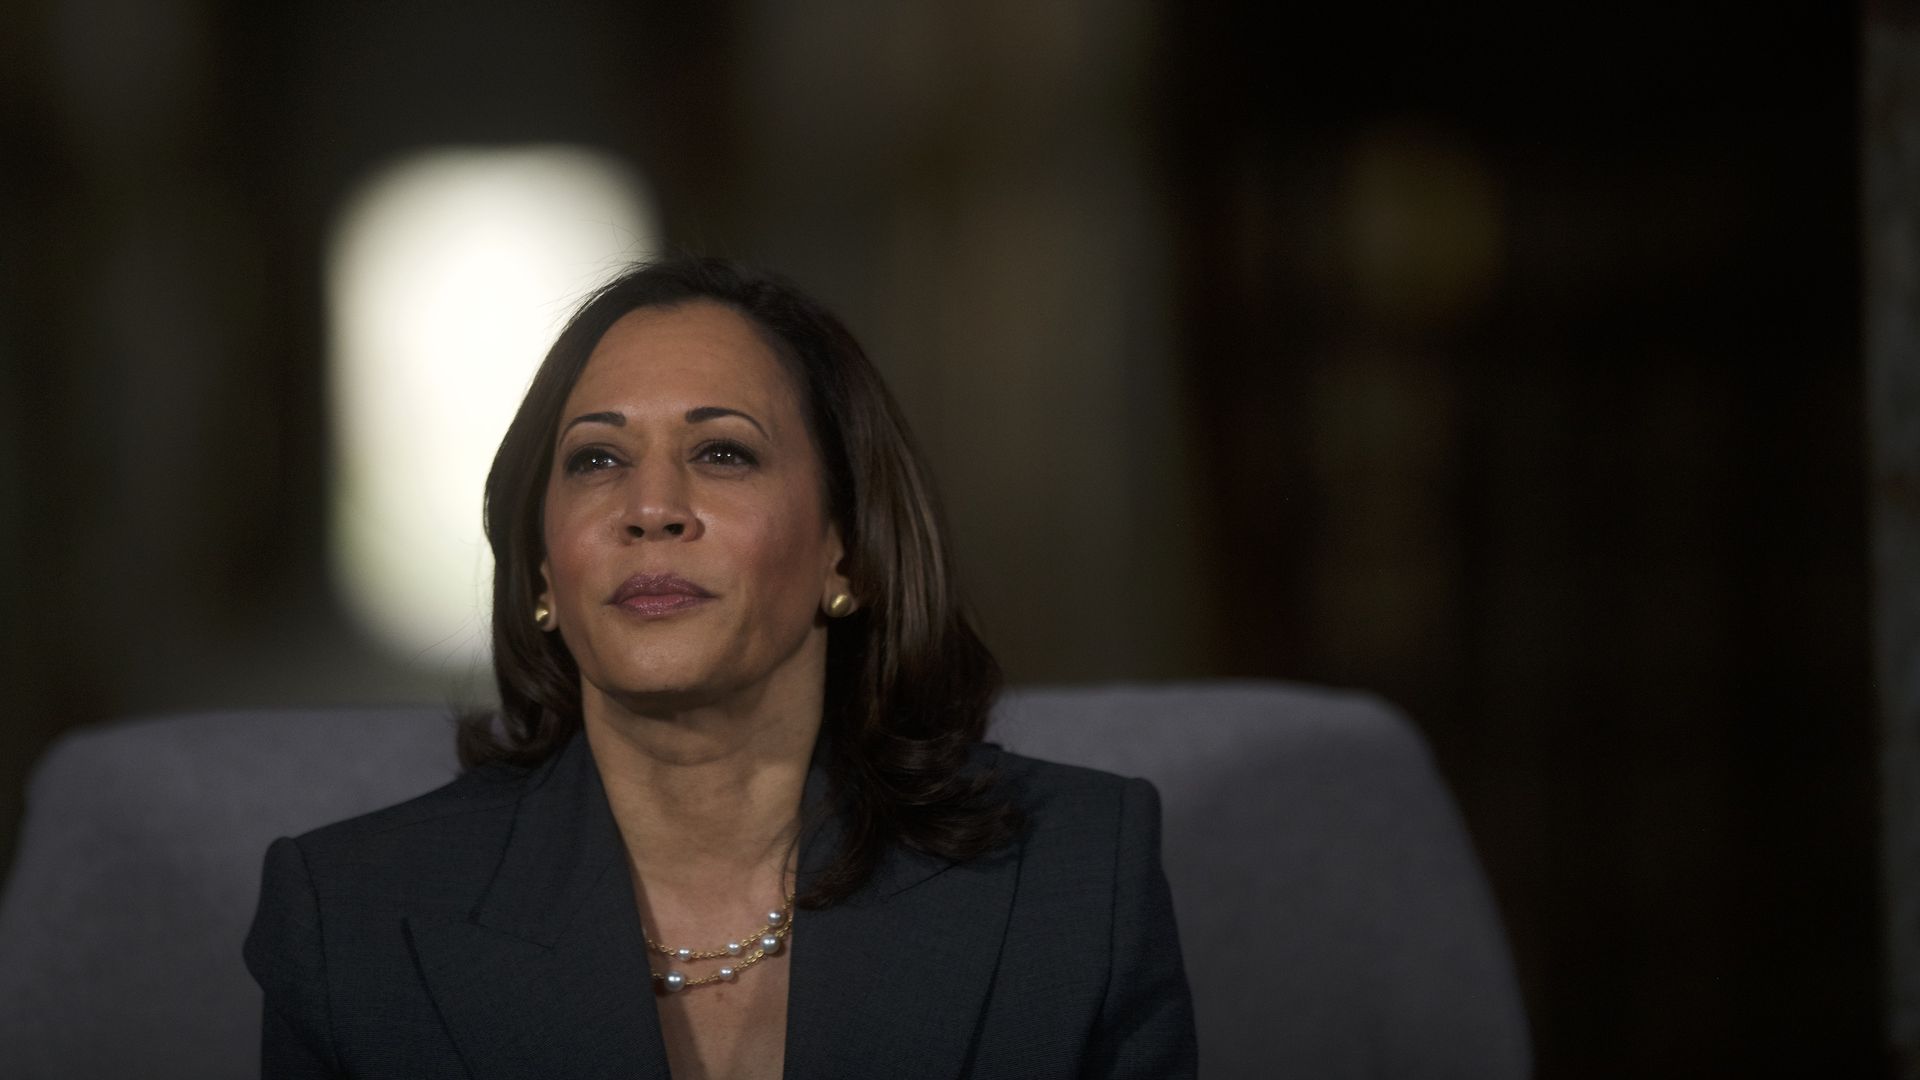 In this image, Kamala Harris sits and looks to the left